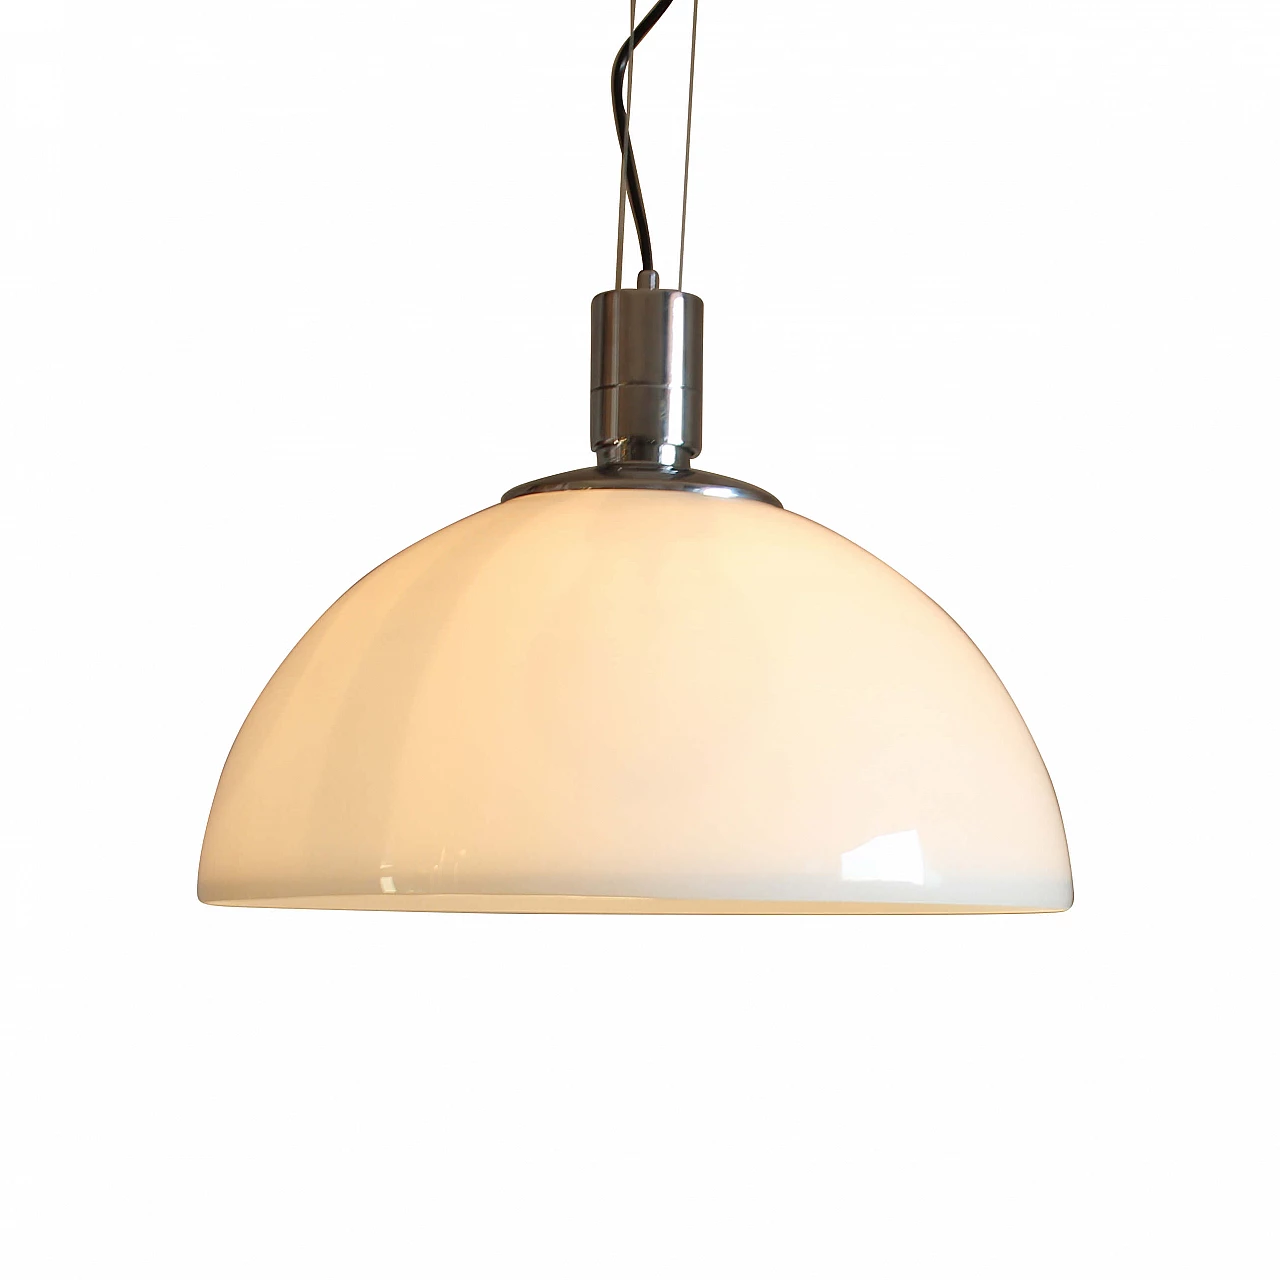 Pendant Lamp AM/AS by Albini Helg Piva for Sirrah, 1969 1273019